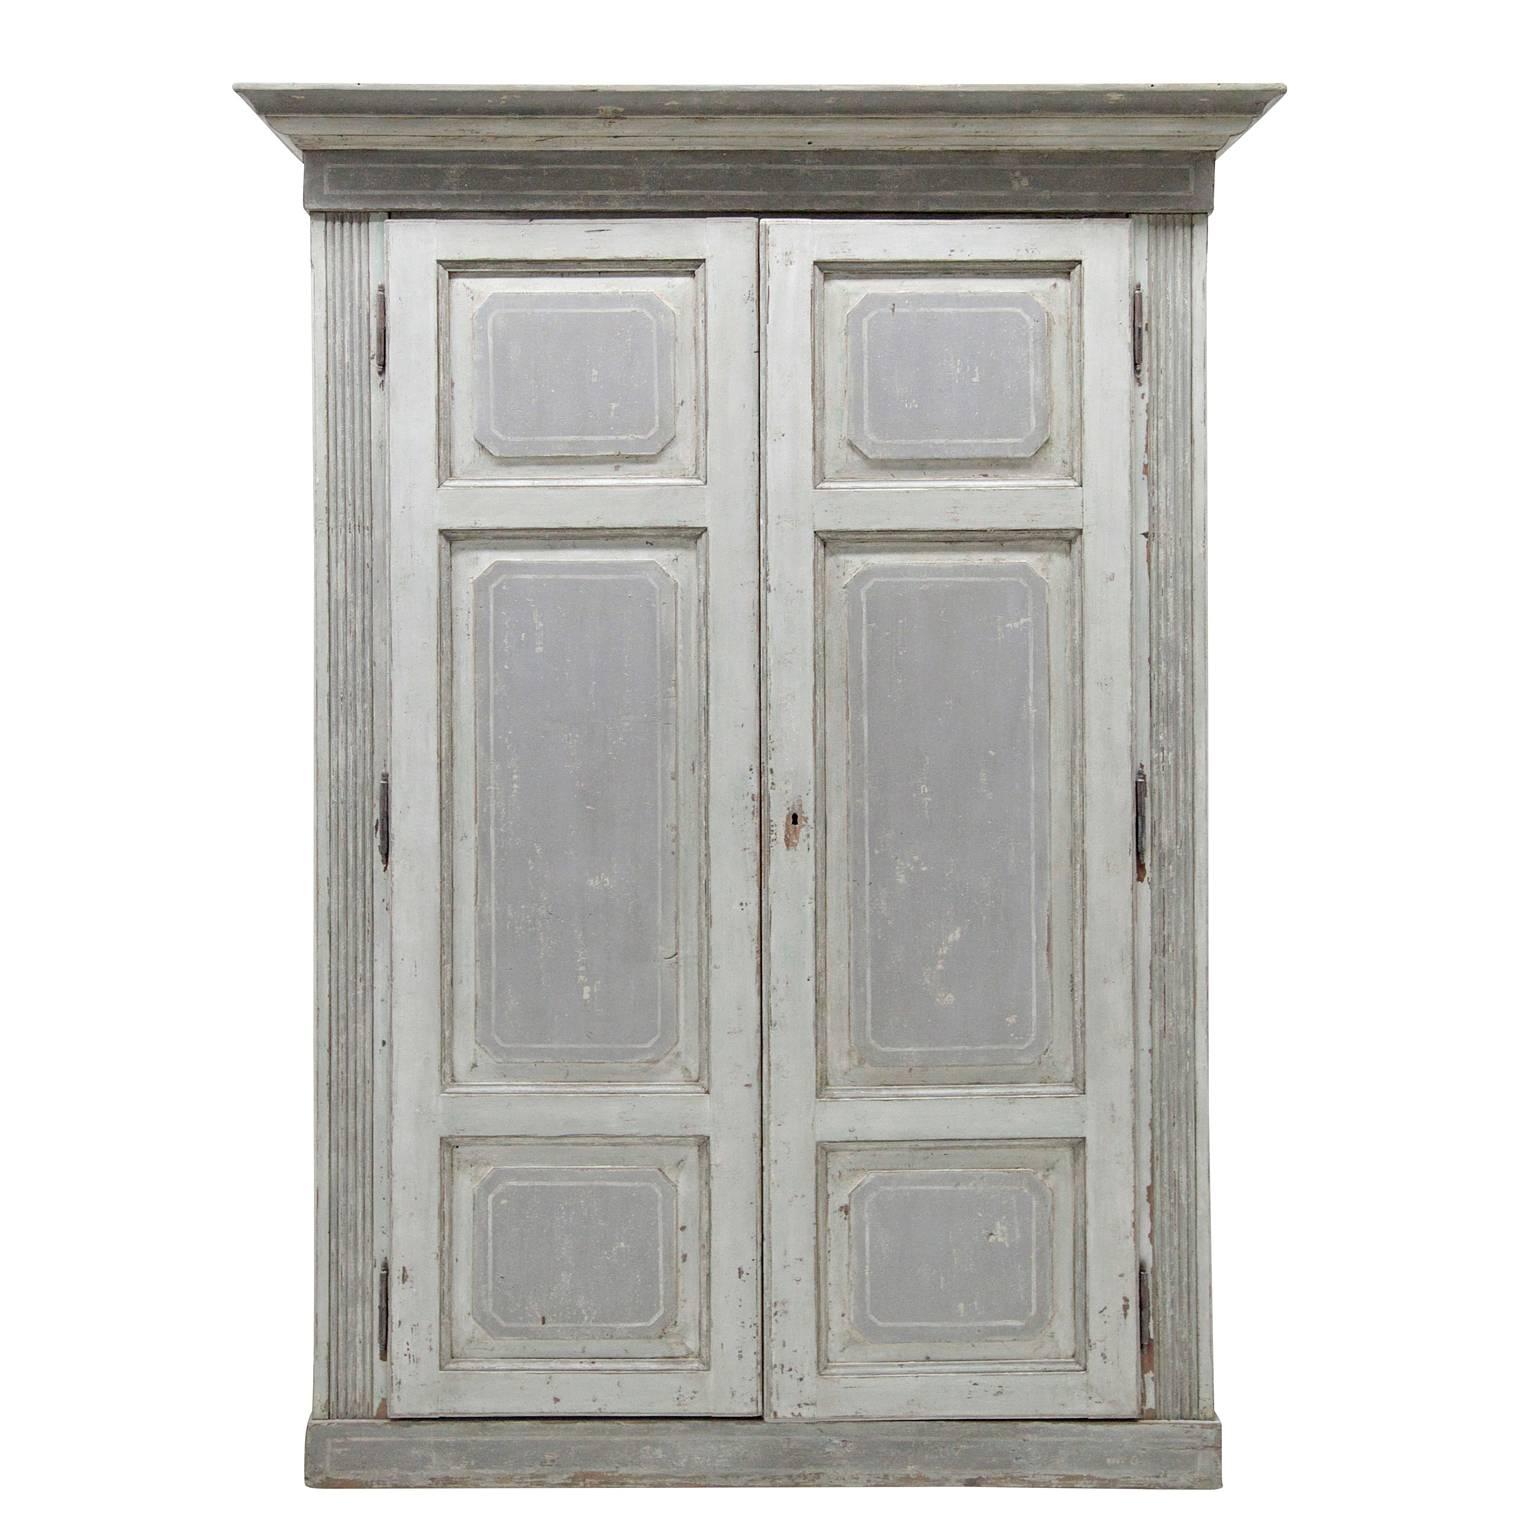 Large, painted Italian cabinet with coffered doors and sides, as well as fluted pilasters at the corners and a multi-stepped cornice.